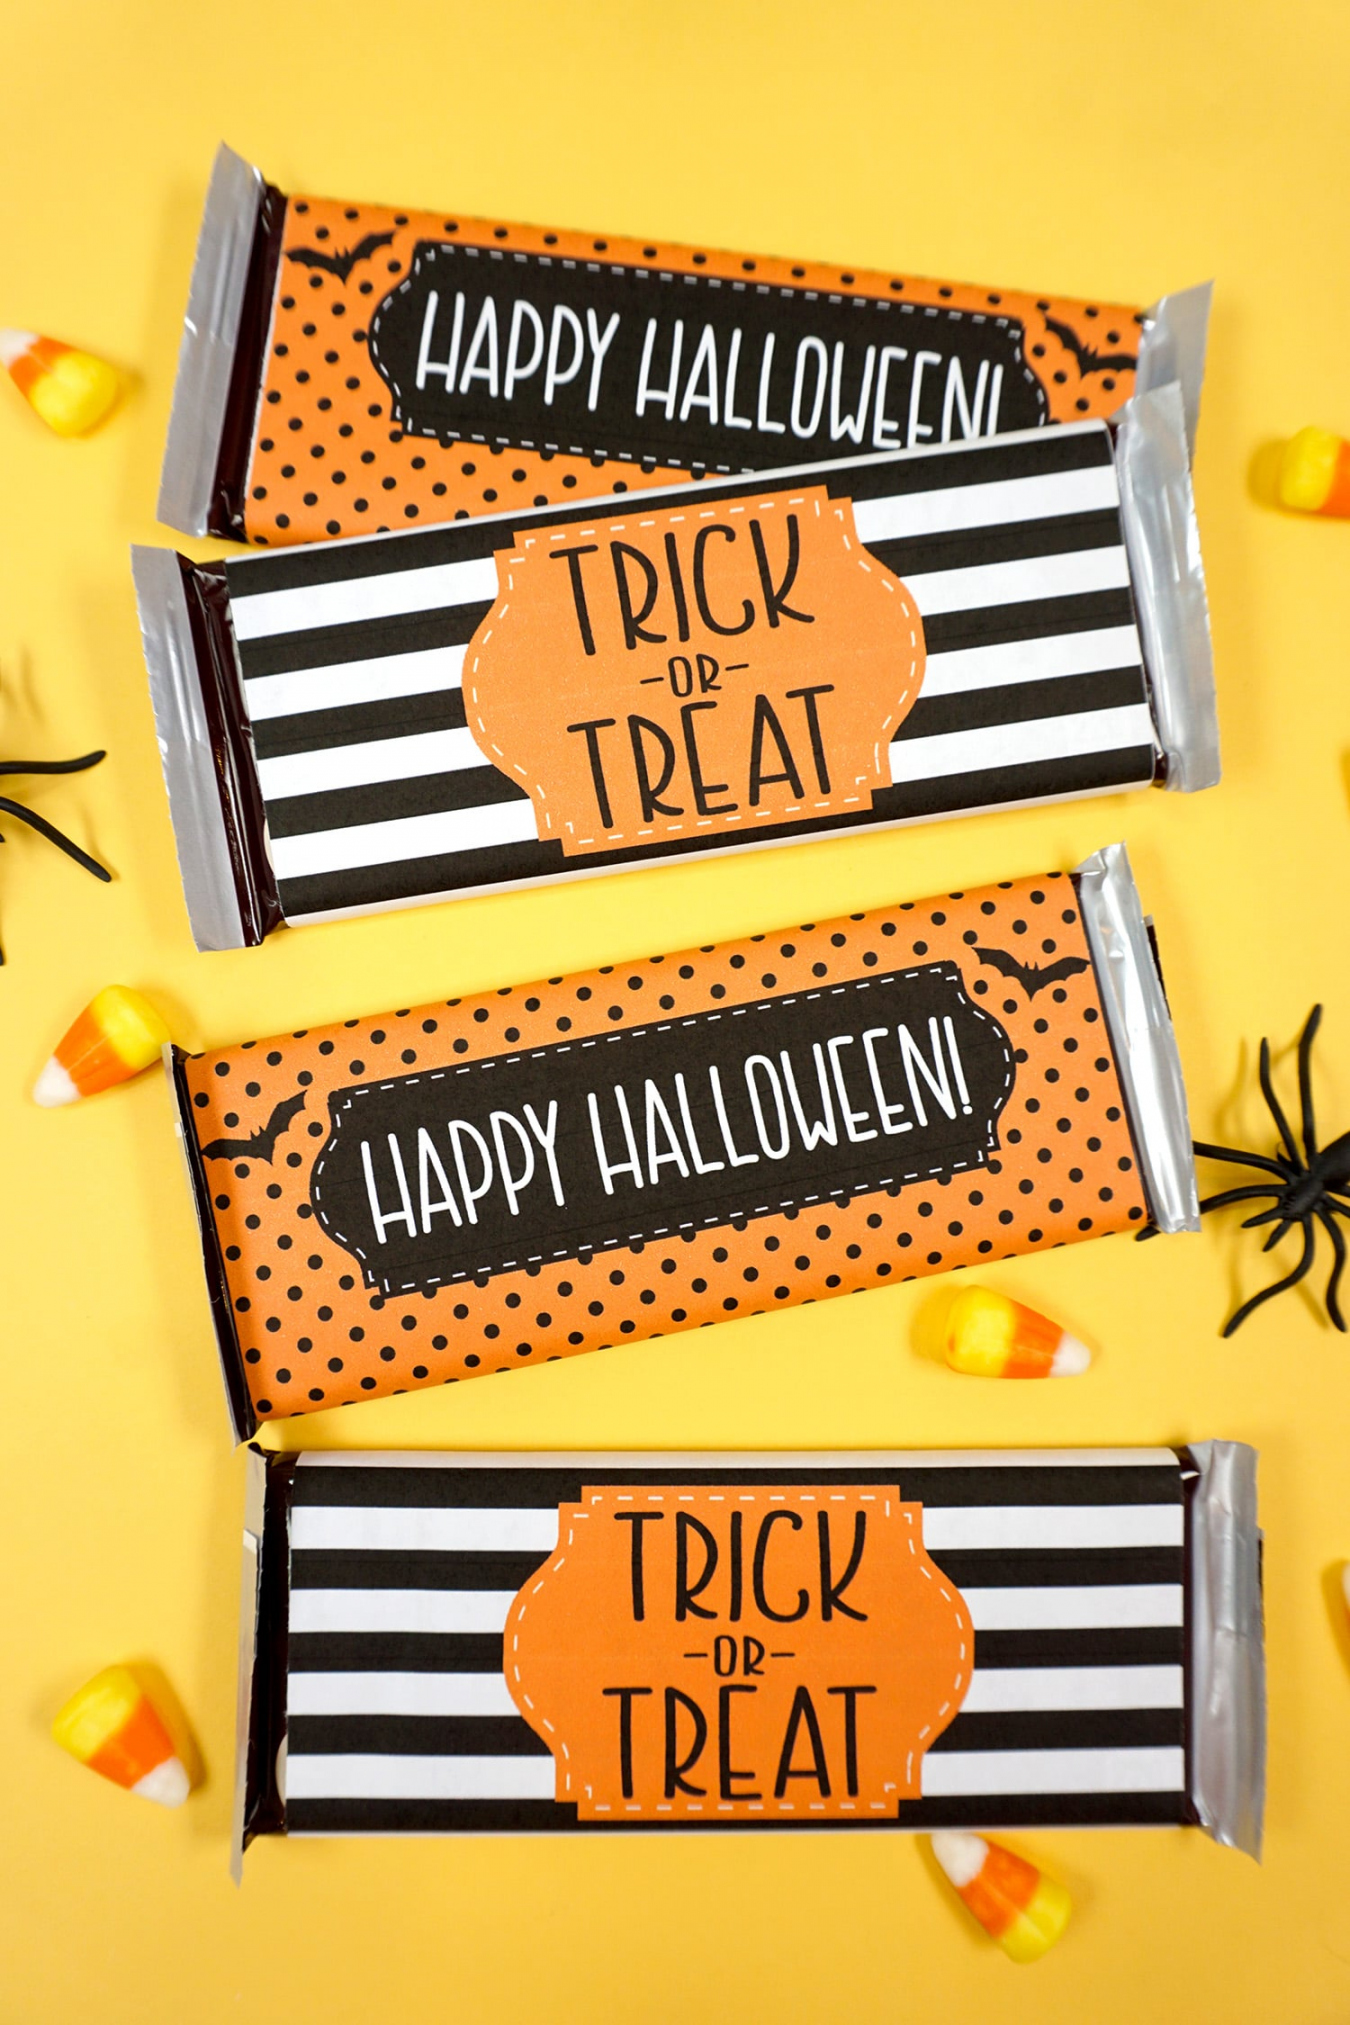 Free Printable Halloween Candy Bar Wrappers - Happiness is Homemade - FREE Printables - Free Printable Candy Bar Wrappers